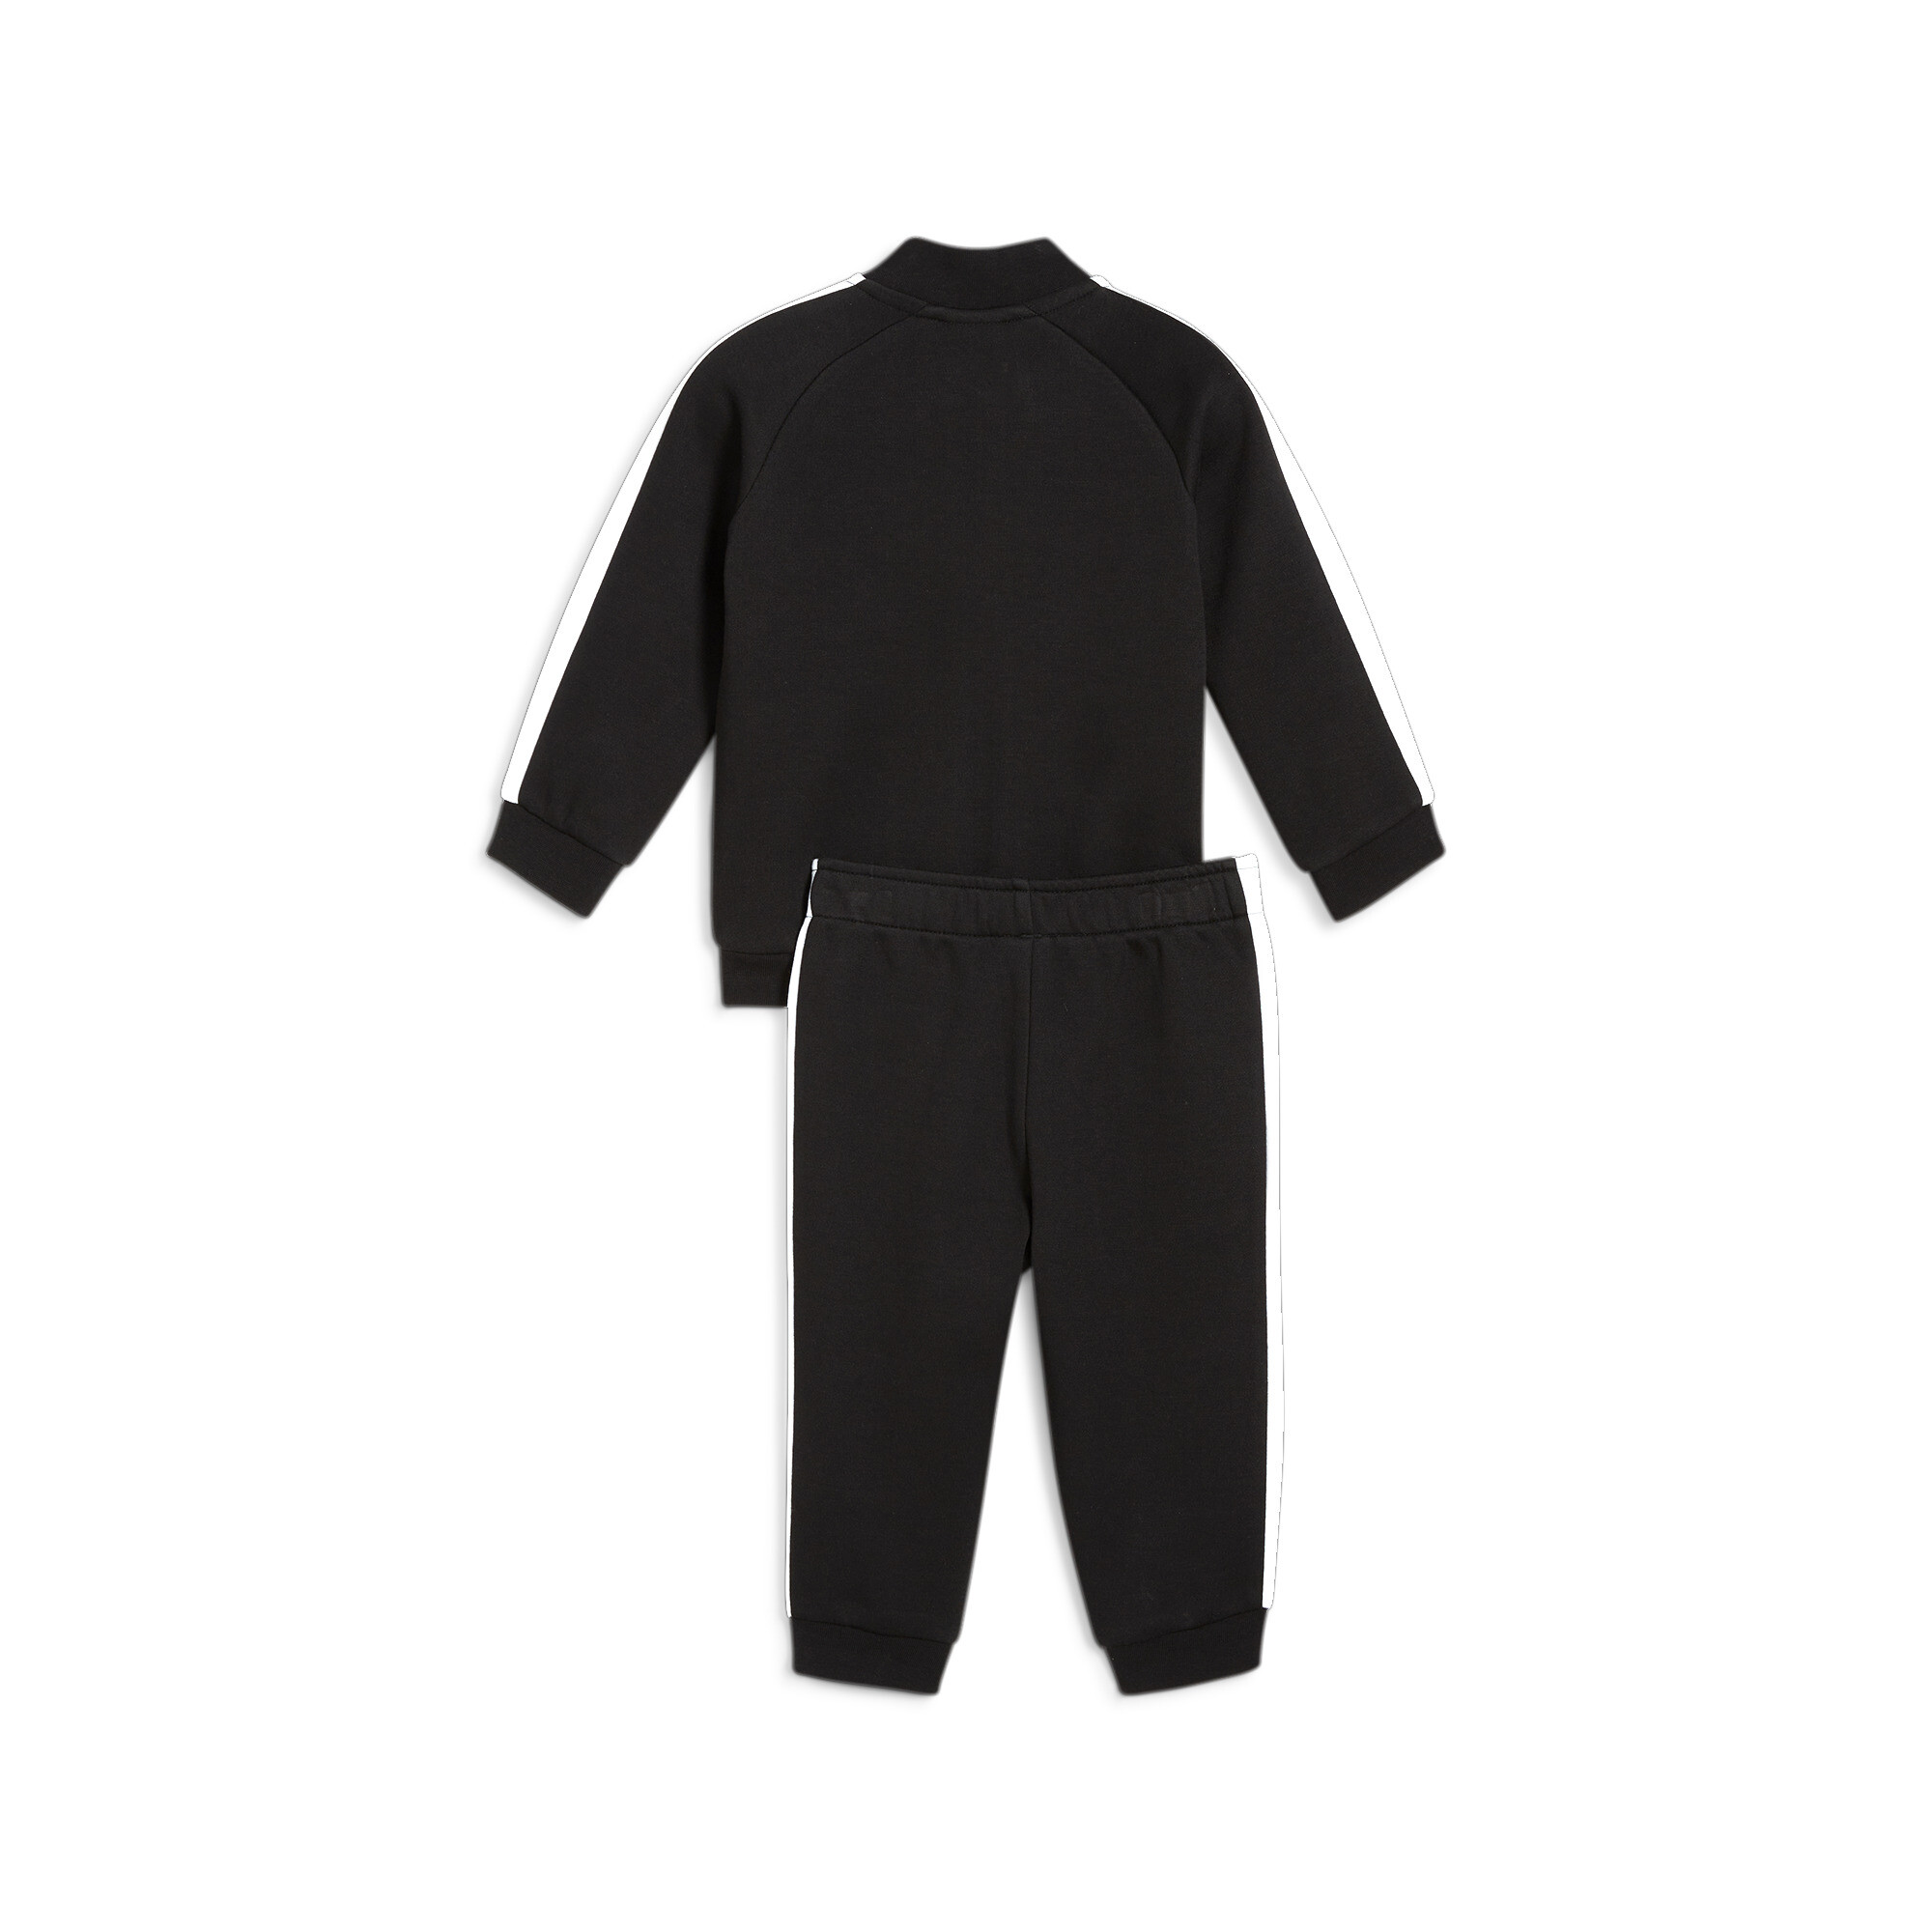 PUMA MINICATS T7 ICONIC Baby Tracksuit Set In 10 - Black, Size 1-2 Youth